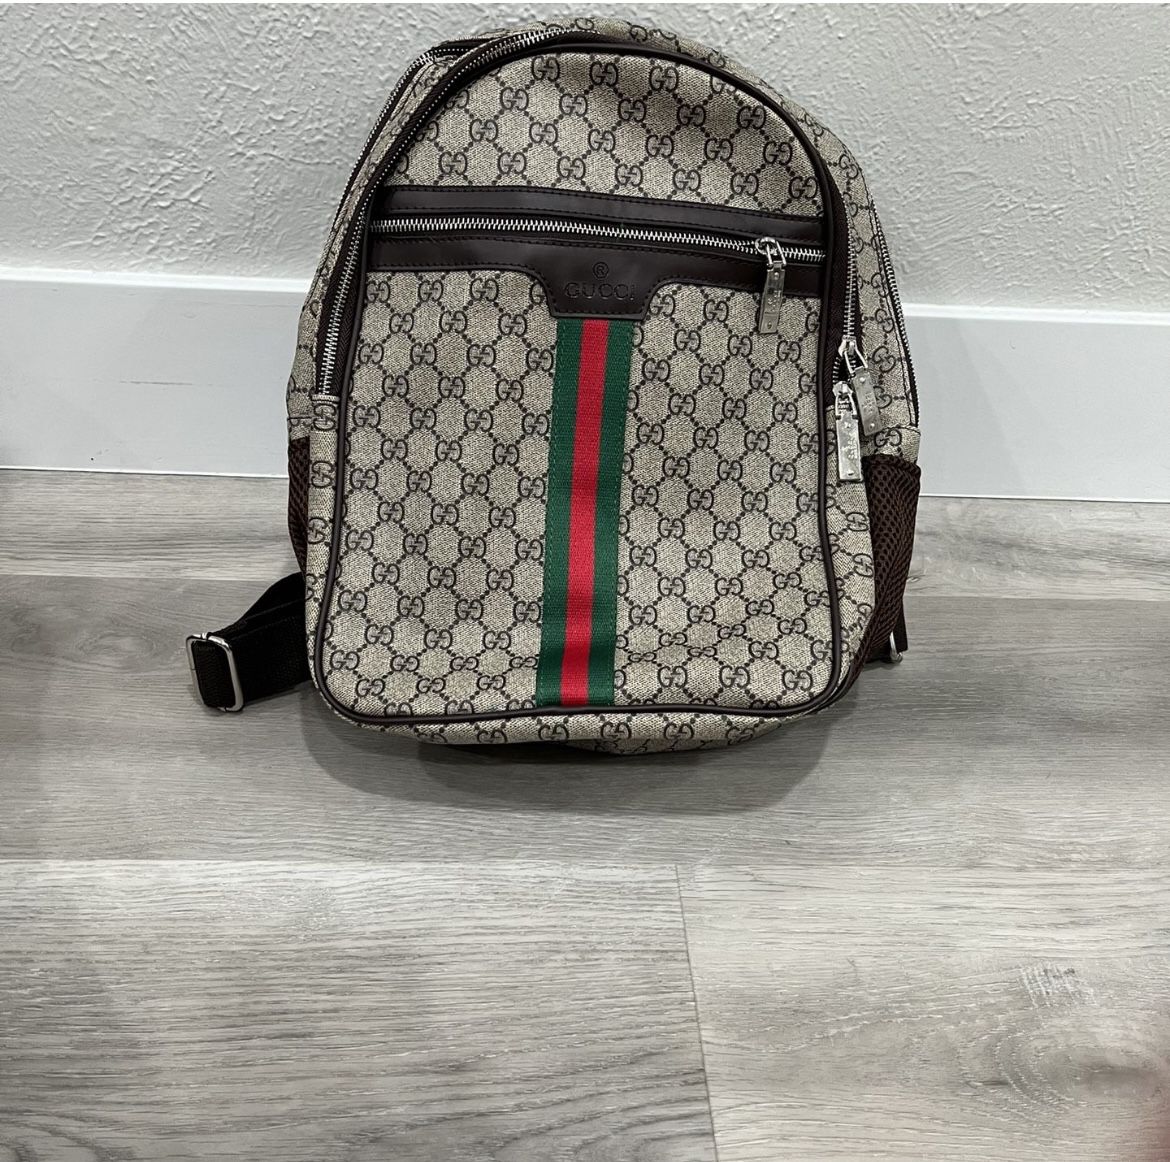 Gucci, Bags, Gucci Backpack